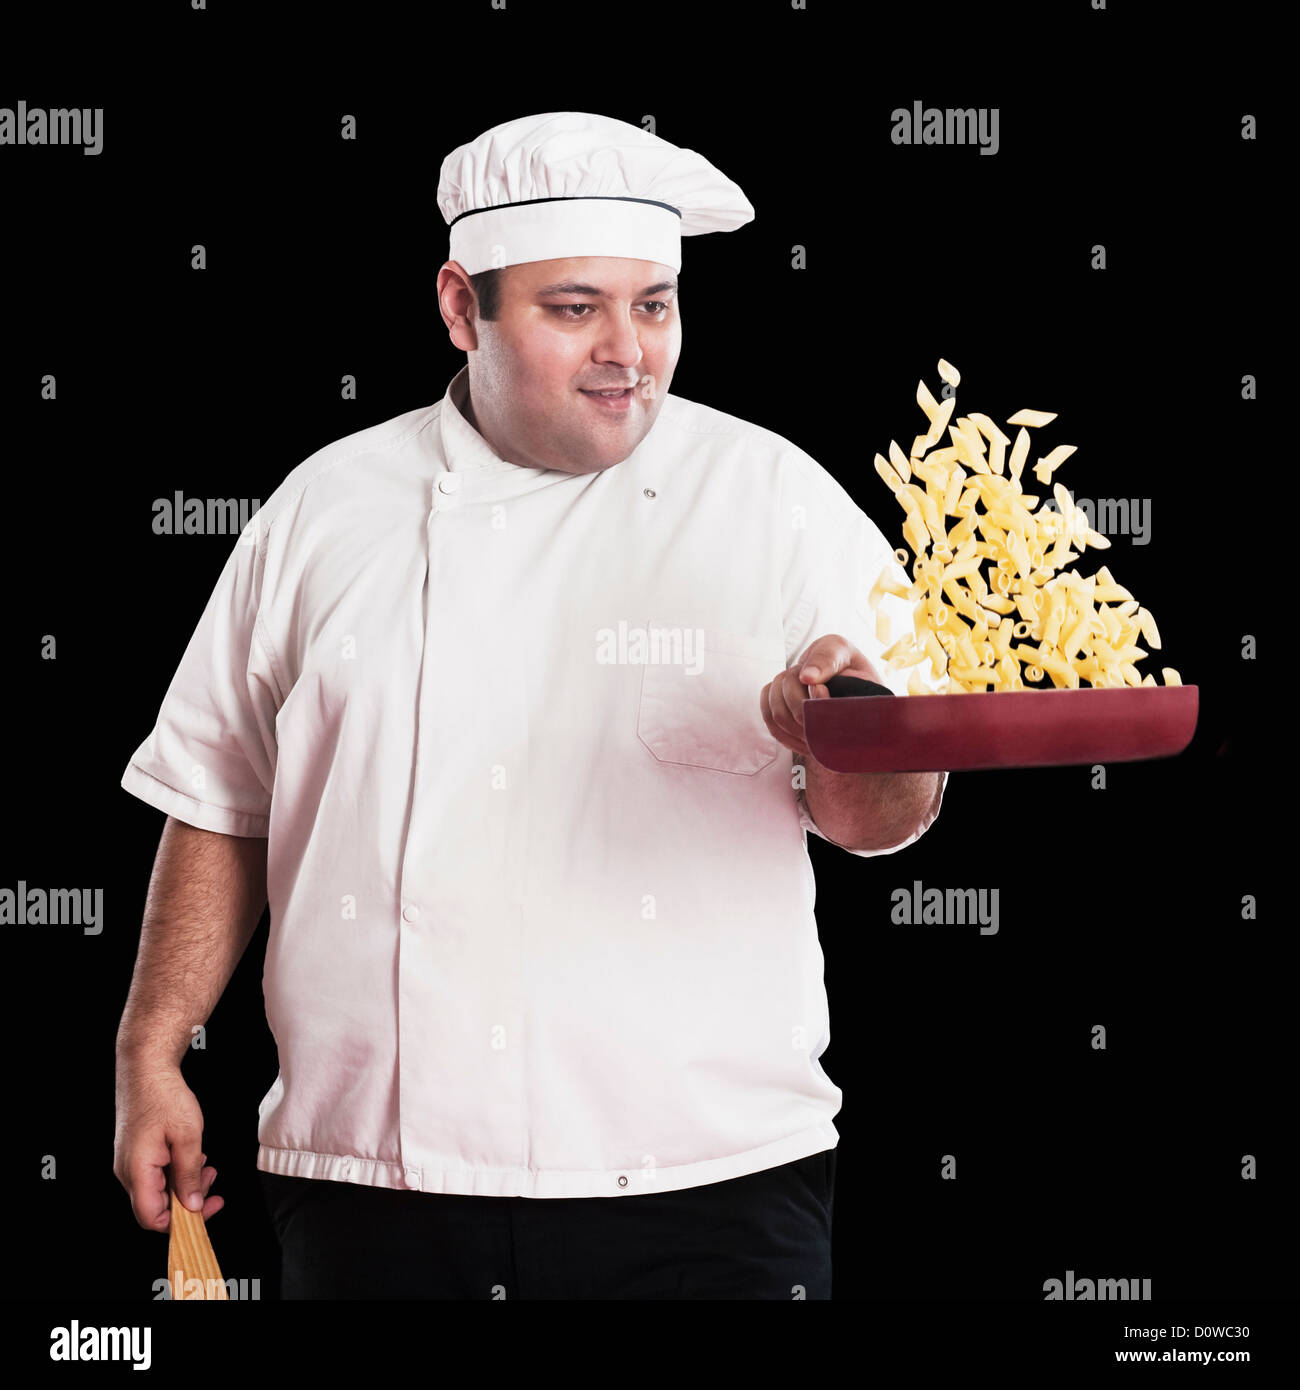 Chef cooking penne pasta Stock Photo - Alamy